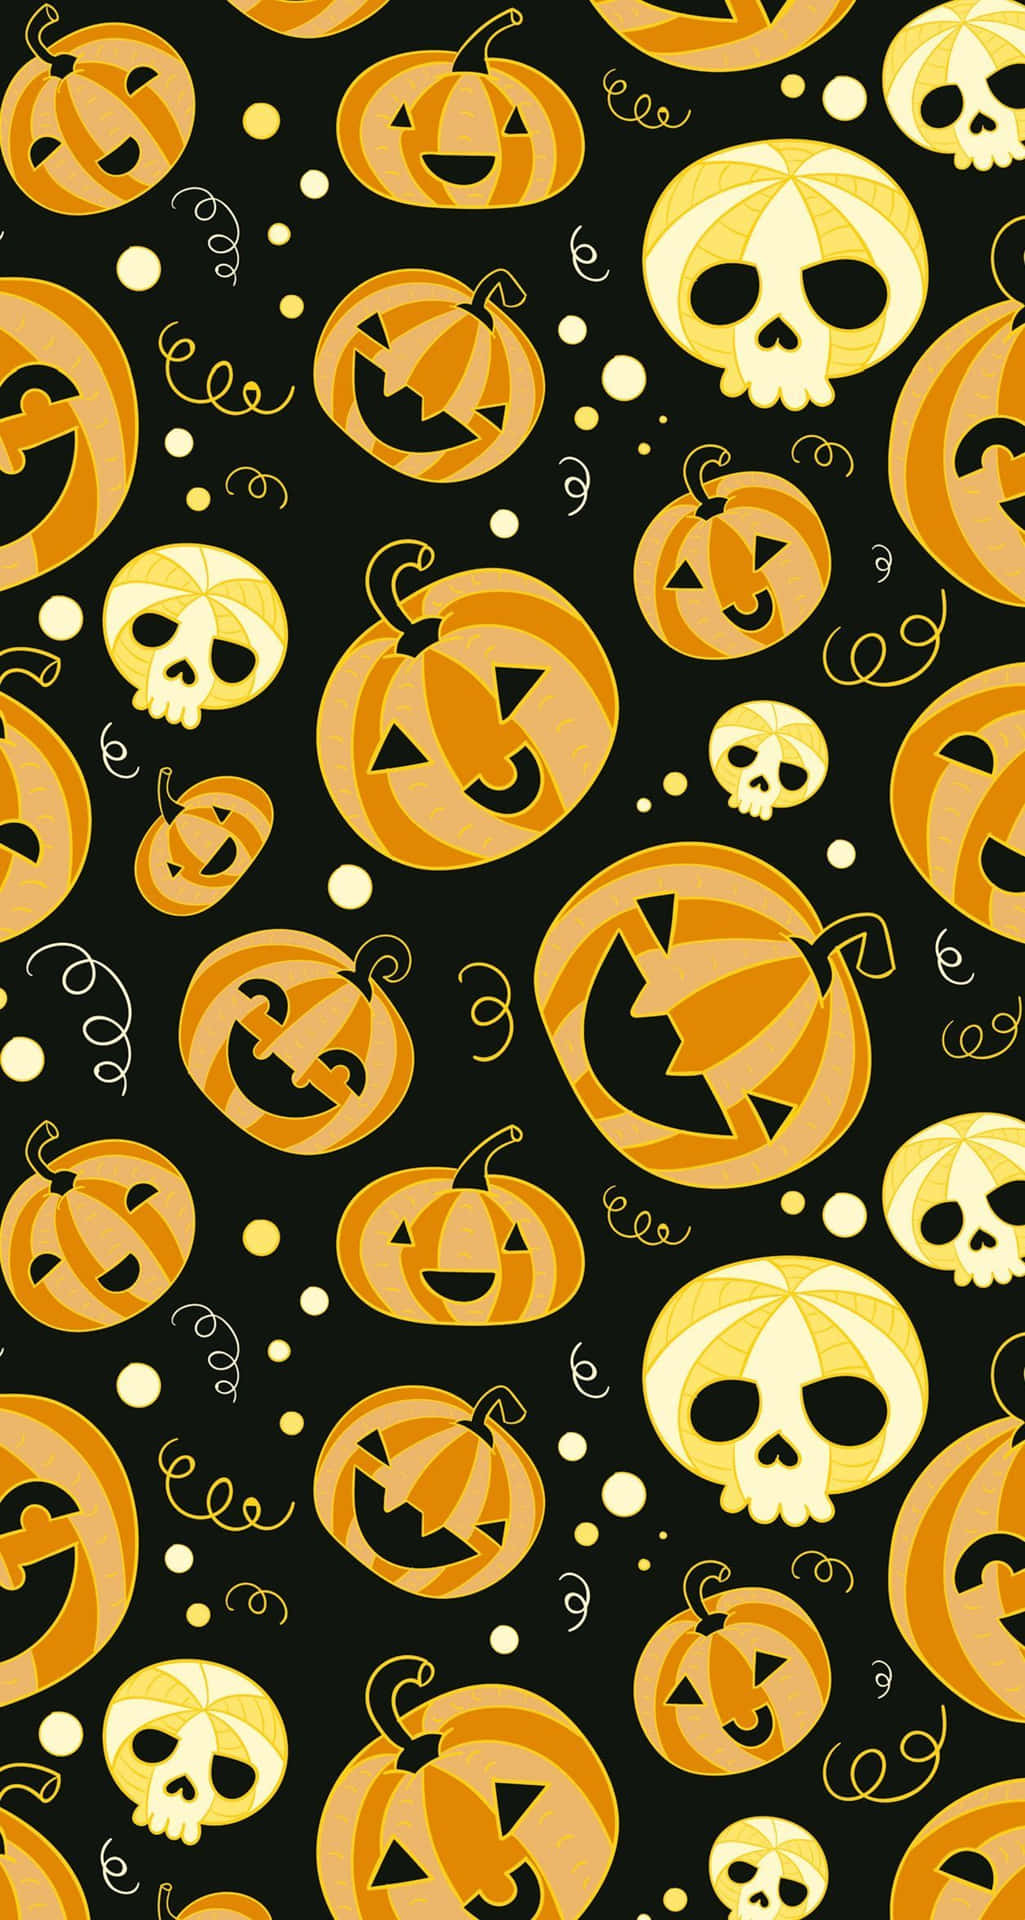 Dress up your iPhone with this Cute Halloween background!